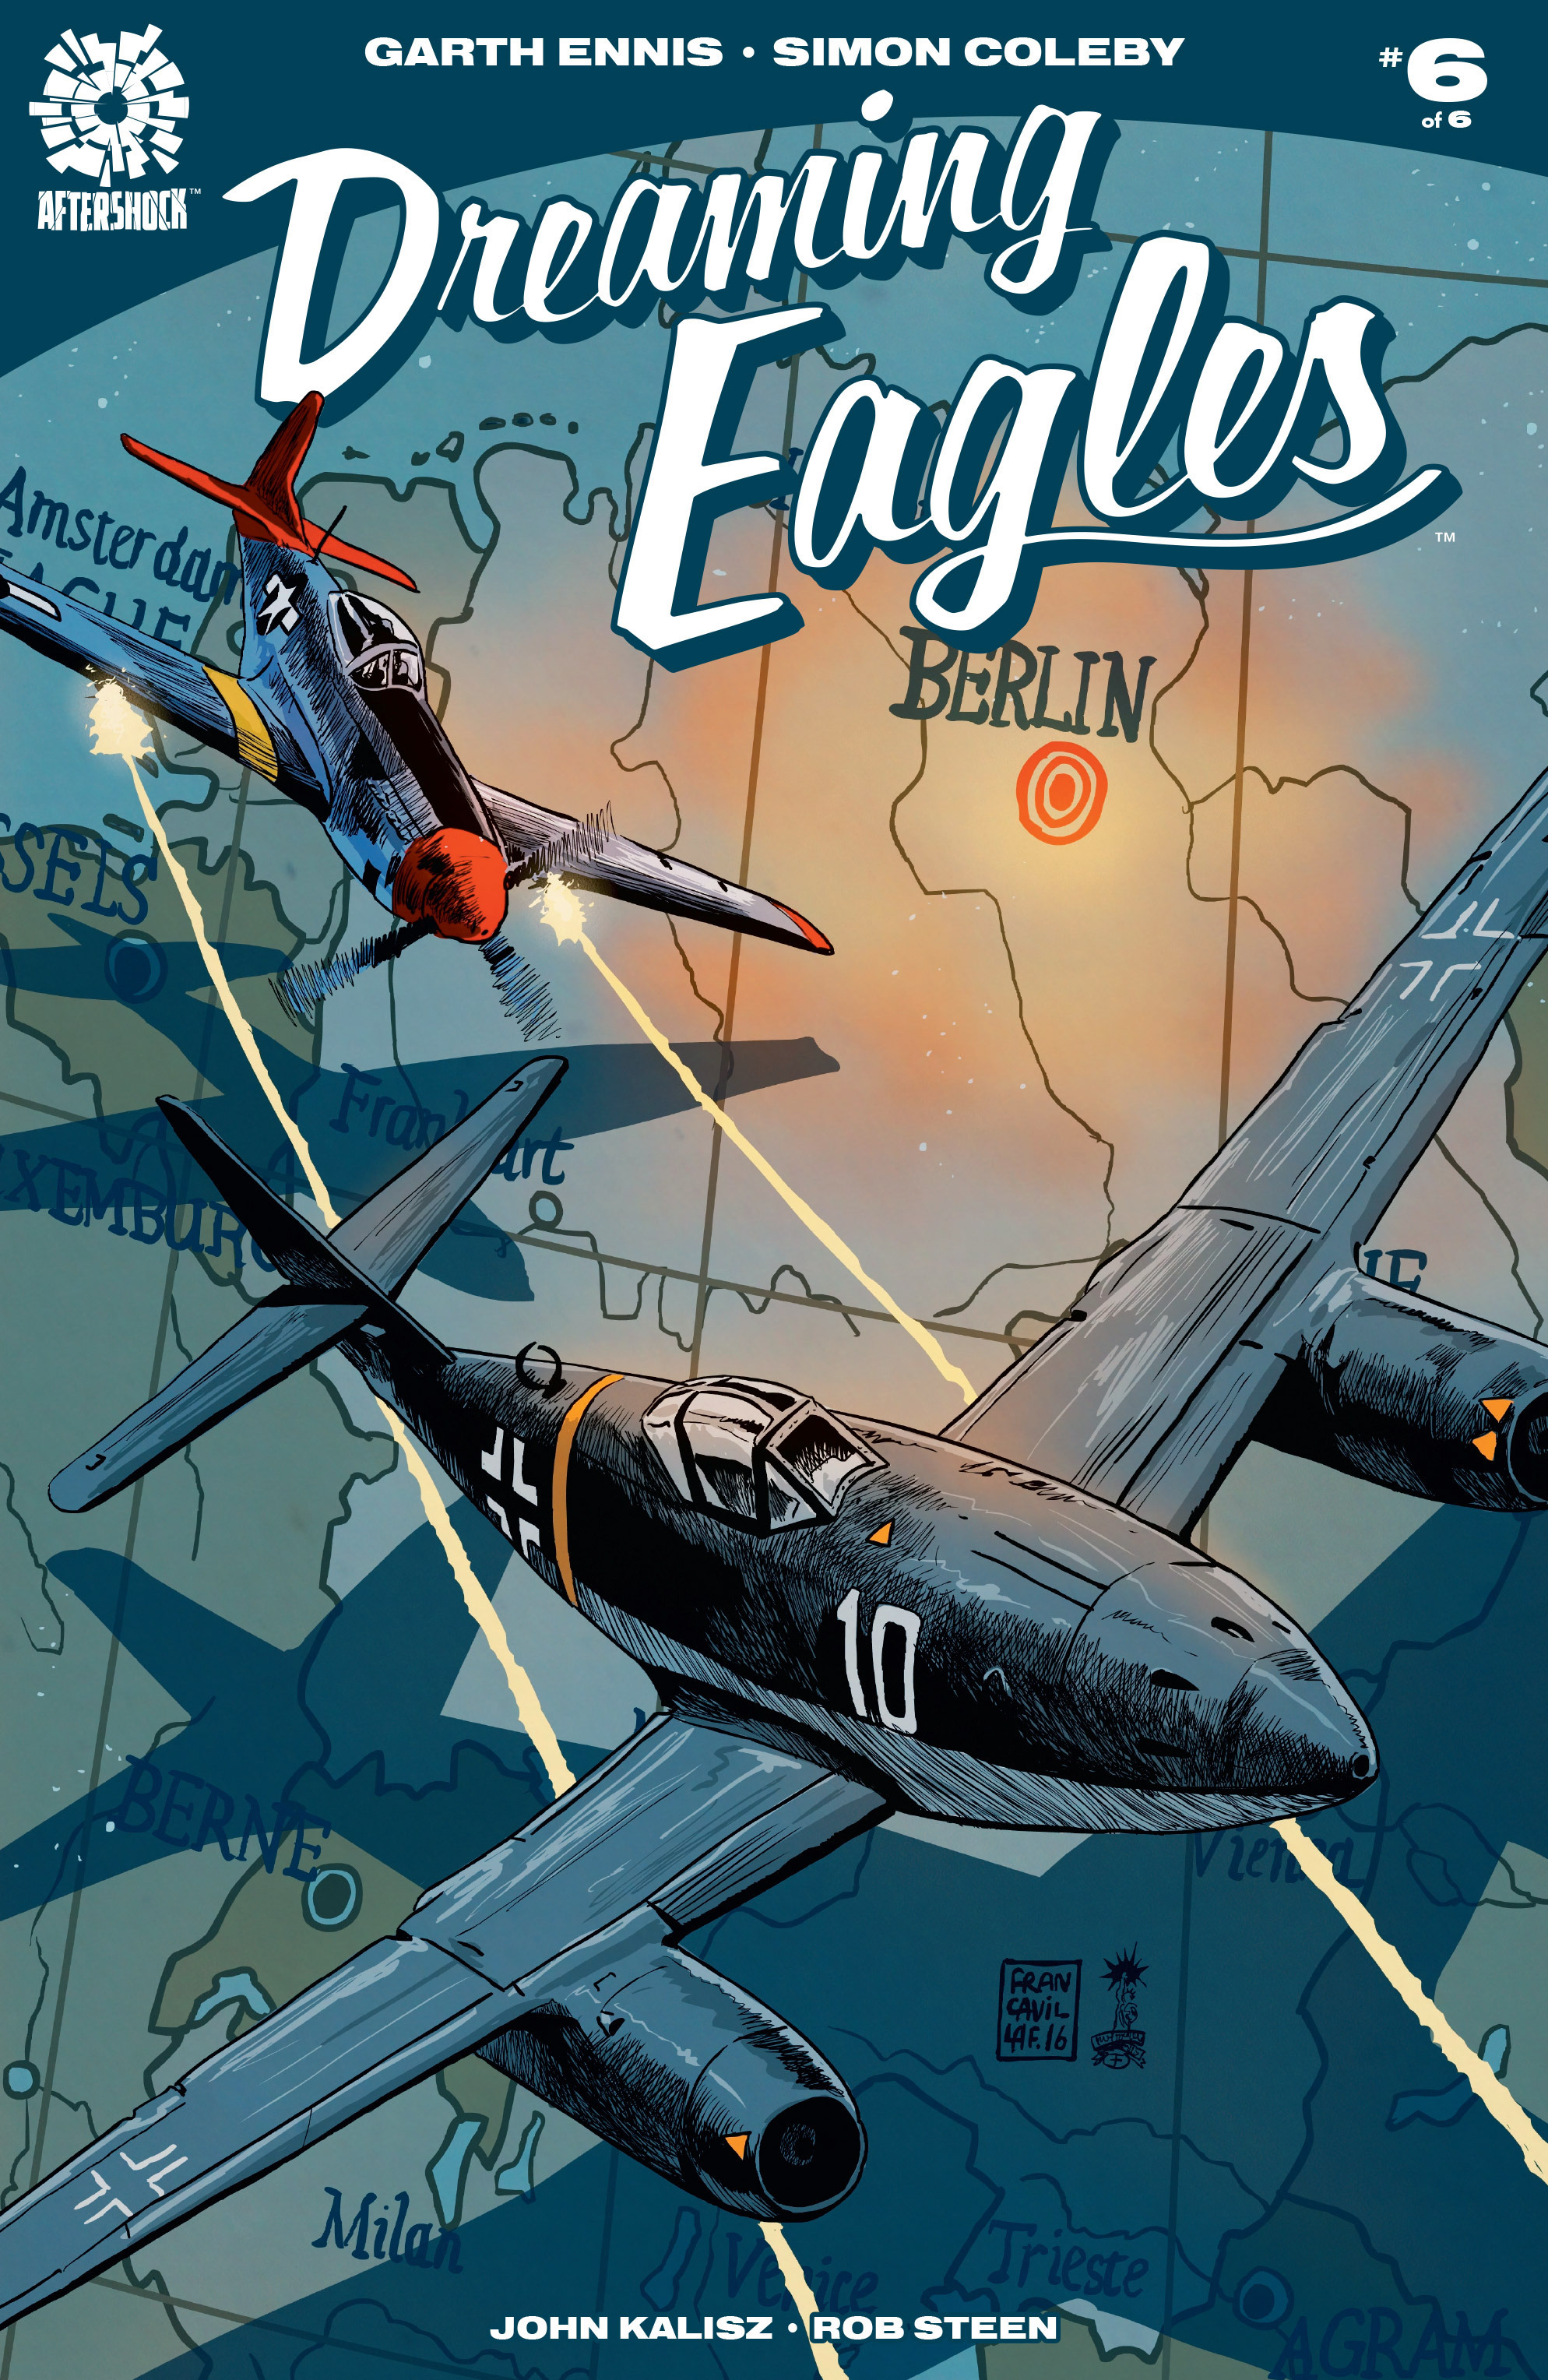 Read online Dreaming Eagles comic -  Issue #6 - 1